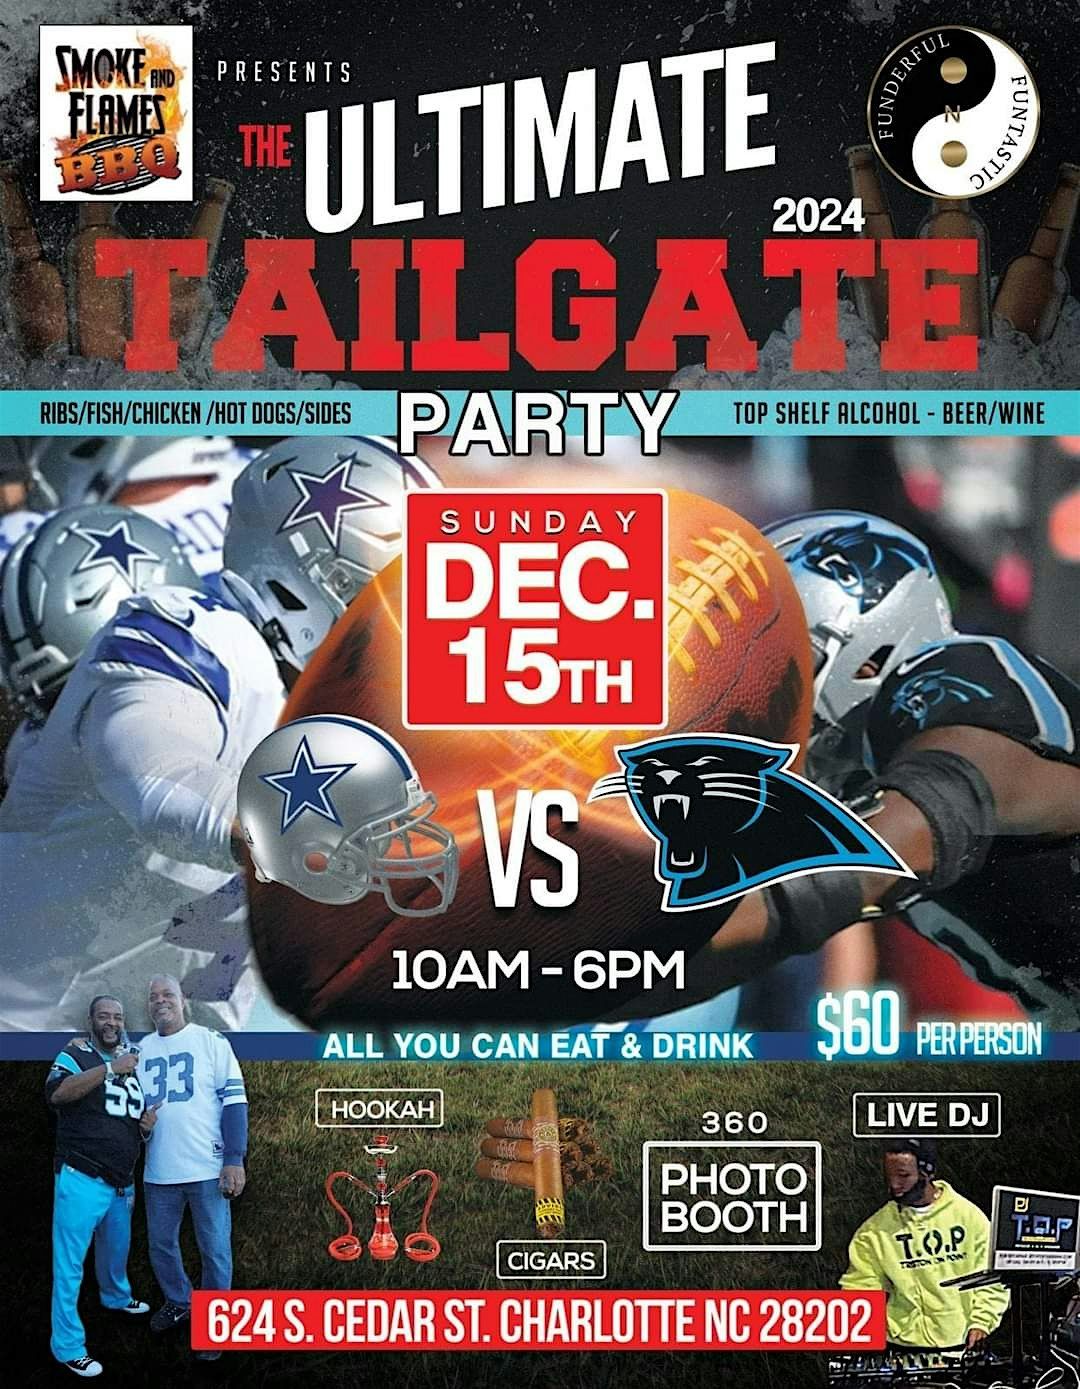 FUNDERFUL N FUNTASTIC FUN ULTIMATE TAILGATE ROUND TRIP PARTY BUS RIDE